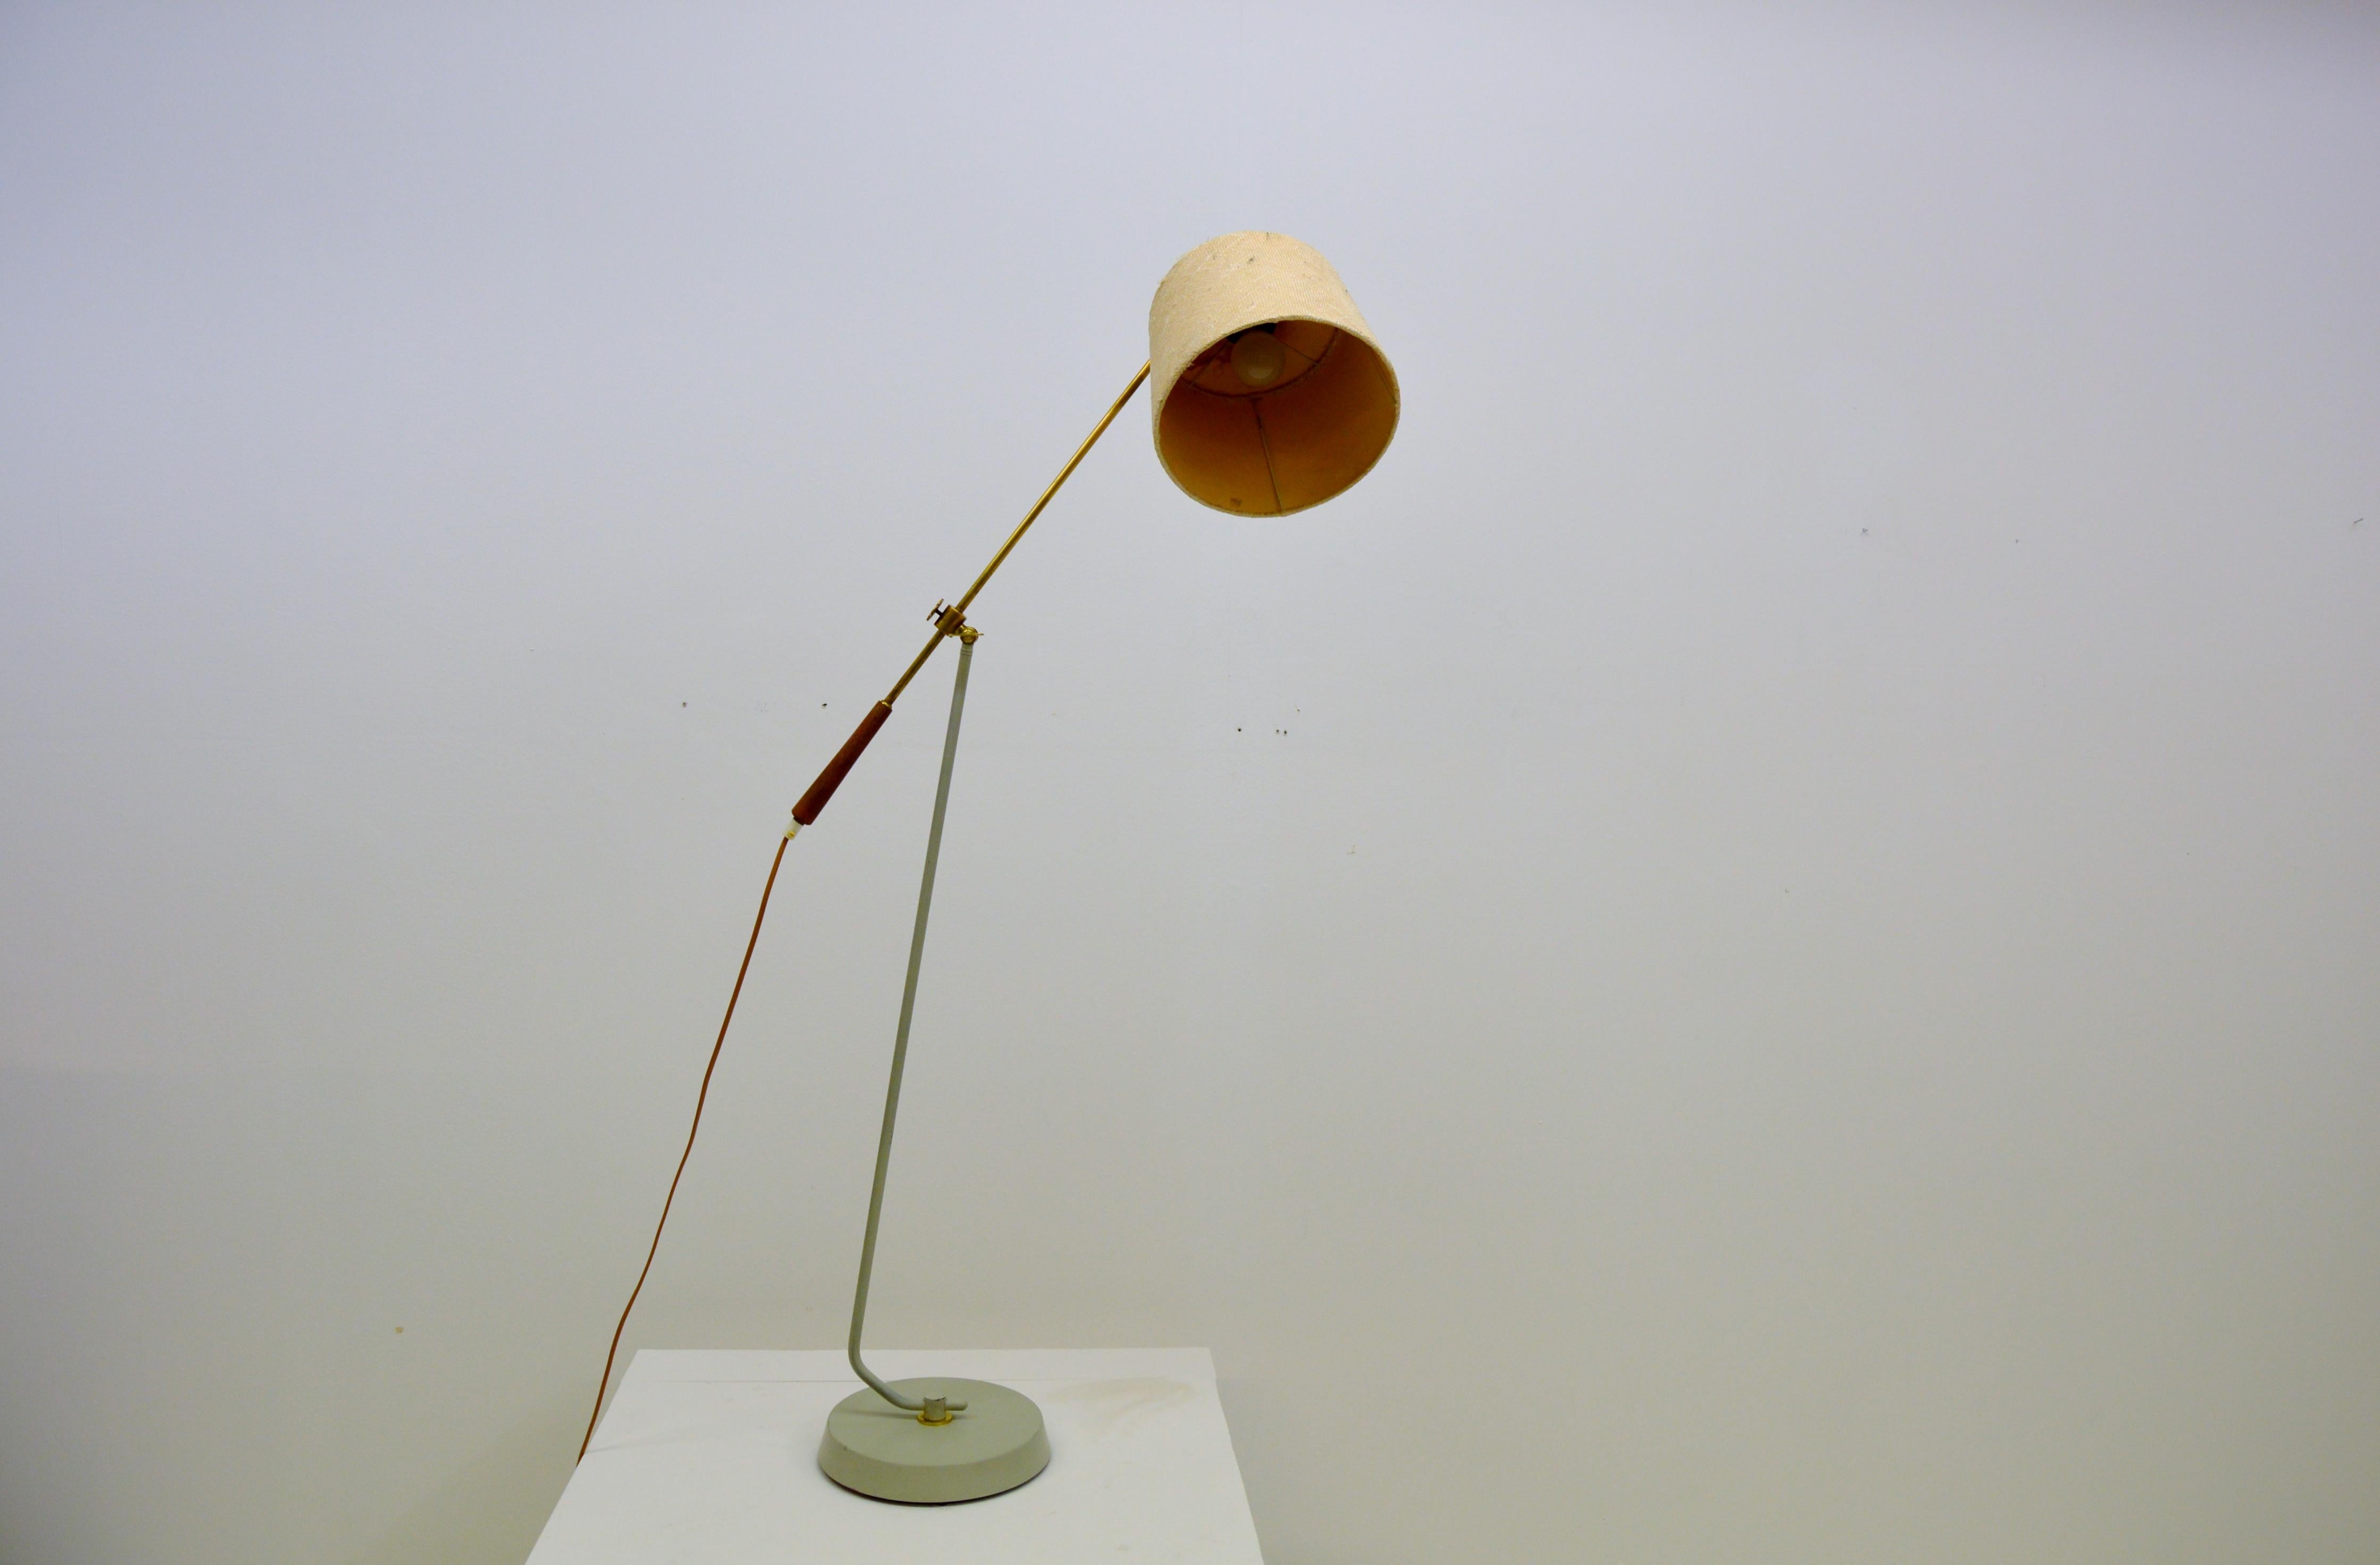 This lamp was made by Göteborgs Armaturhantverk during the 1950s or 1960s and is very desirable and unusual.
Adjustable height and movable arm length. Height 110-140 centimeters.

Brass and teak details. White-grey laquered metal with some color